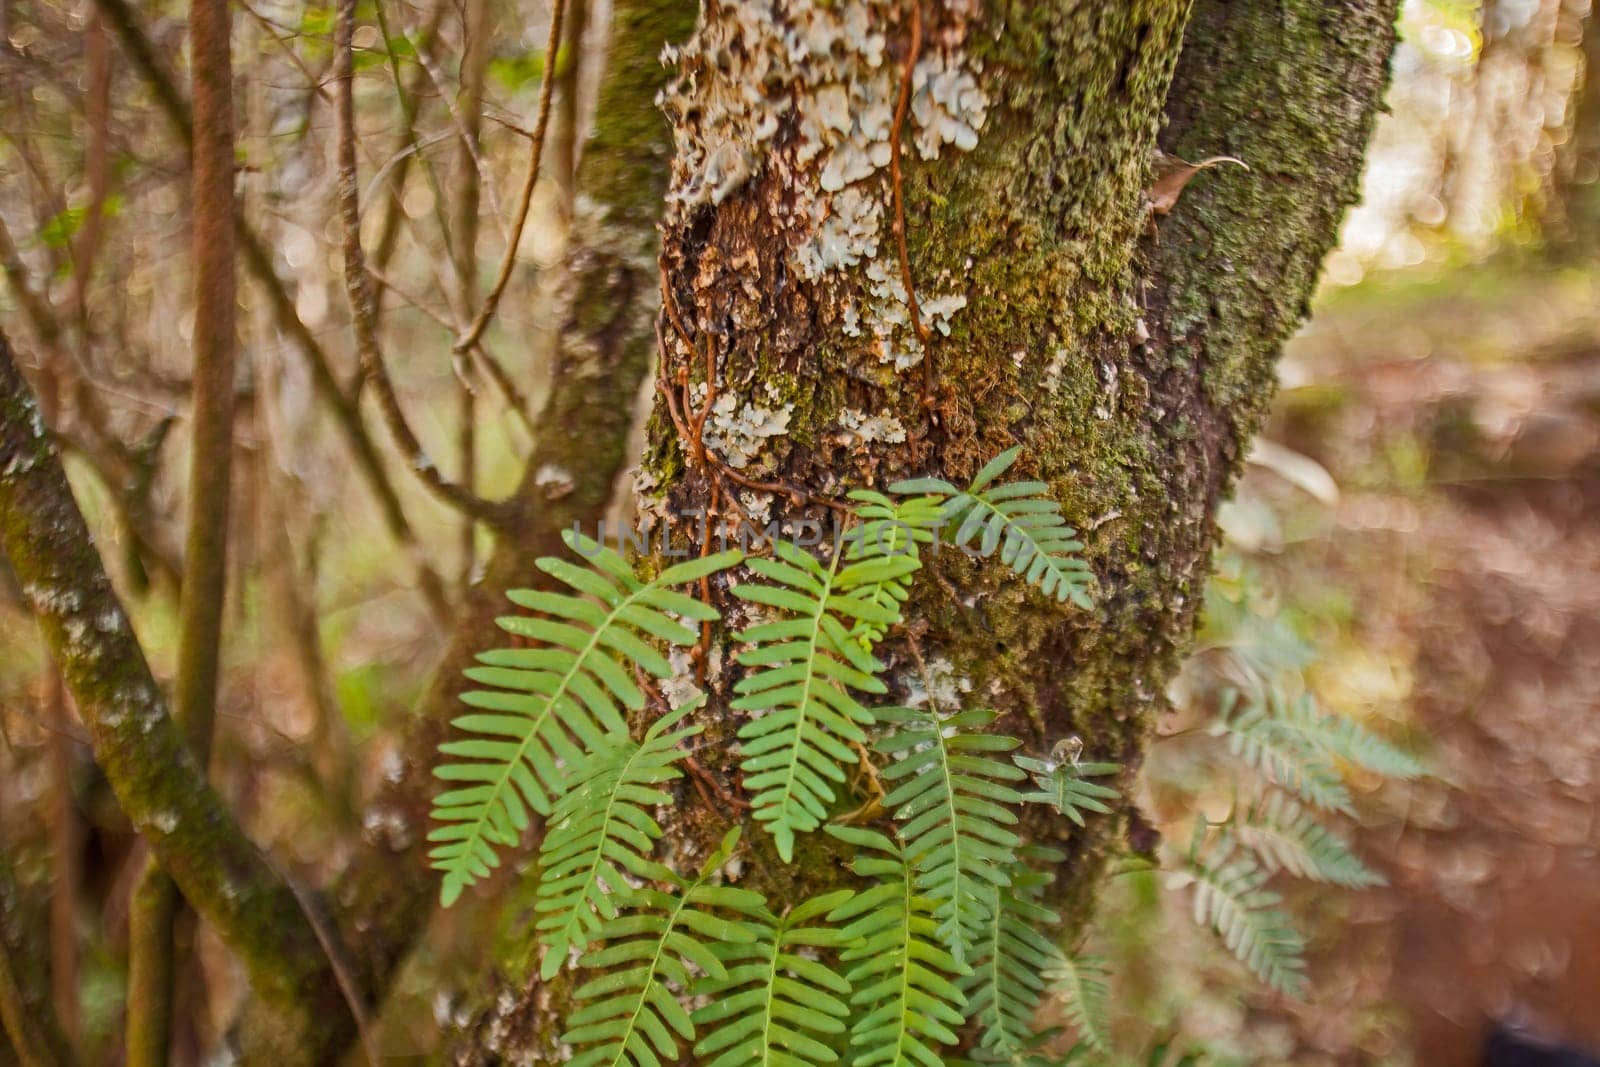 The Resurrection Fern (Pleopeltis polypodioides) climbig up a tree trunk in the Royal Natal National Park, KwaZulu Natal South Africa